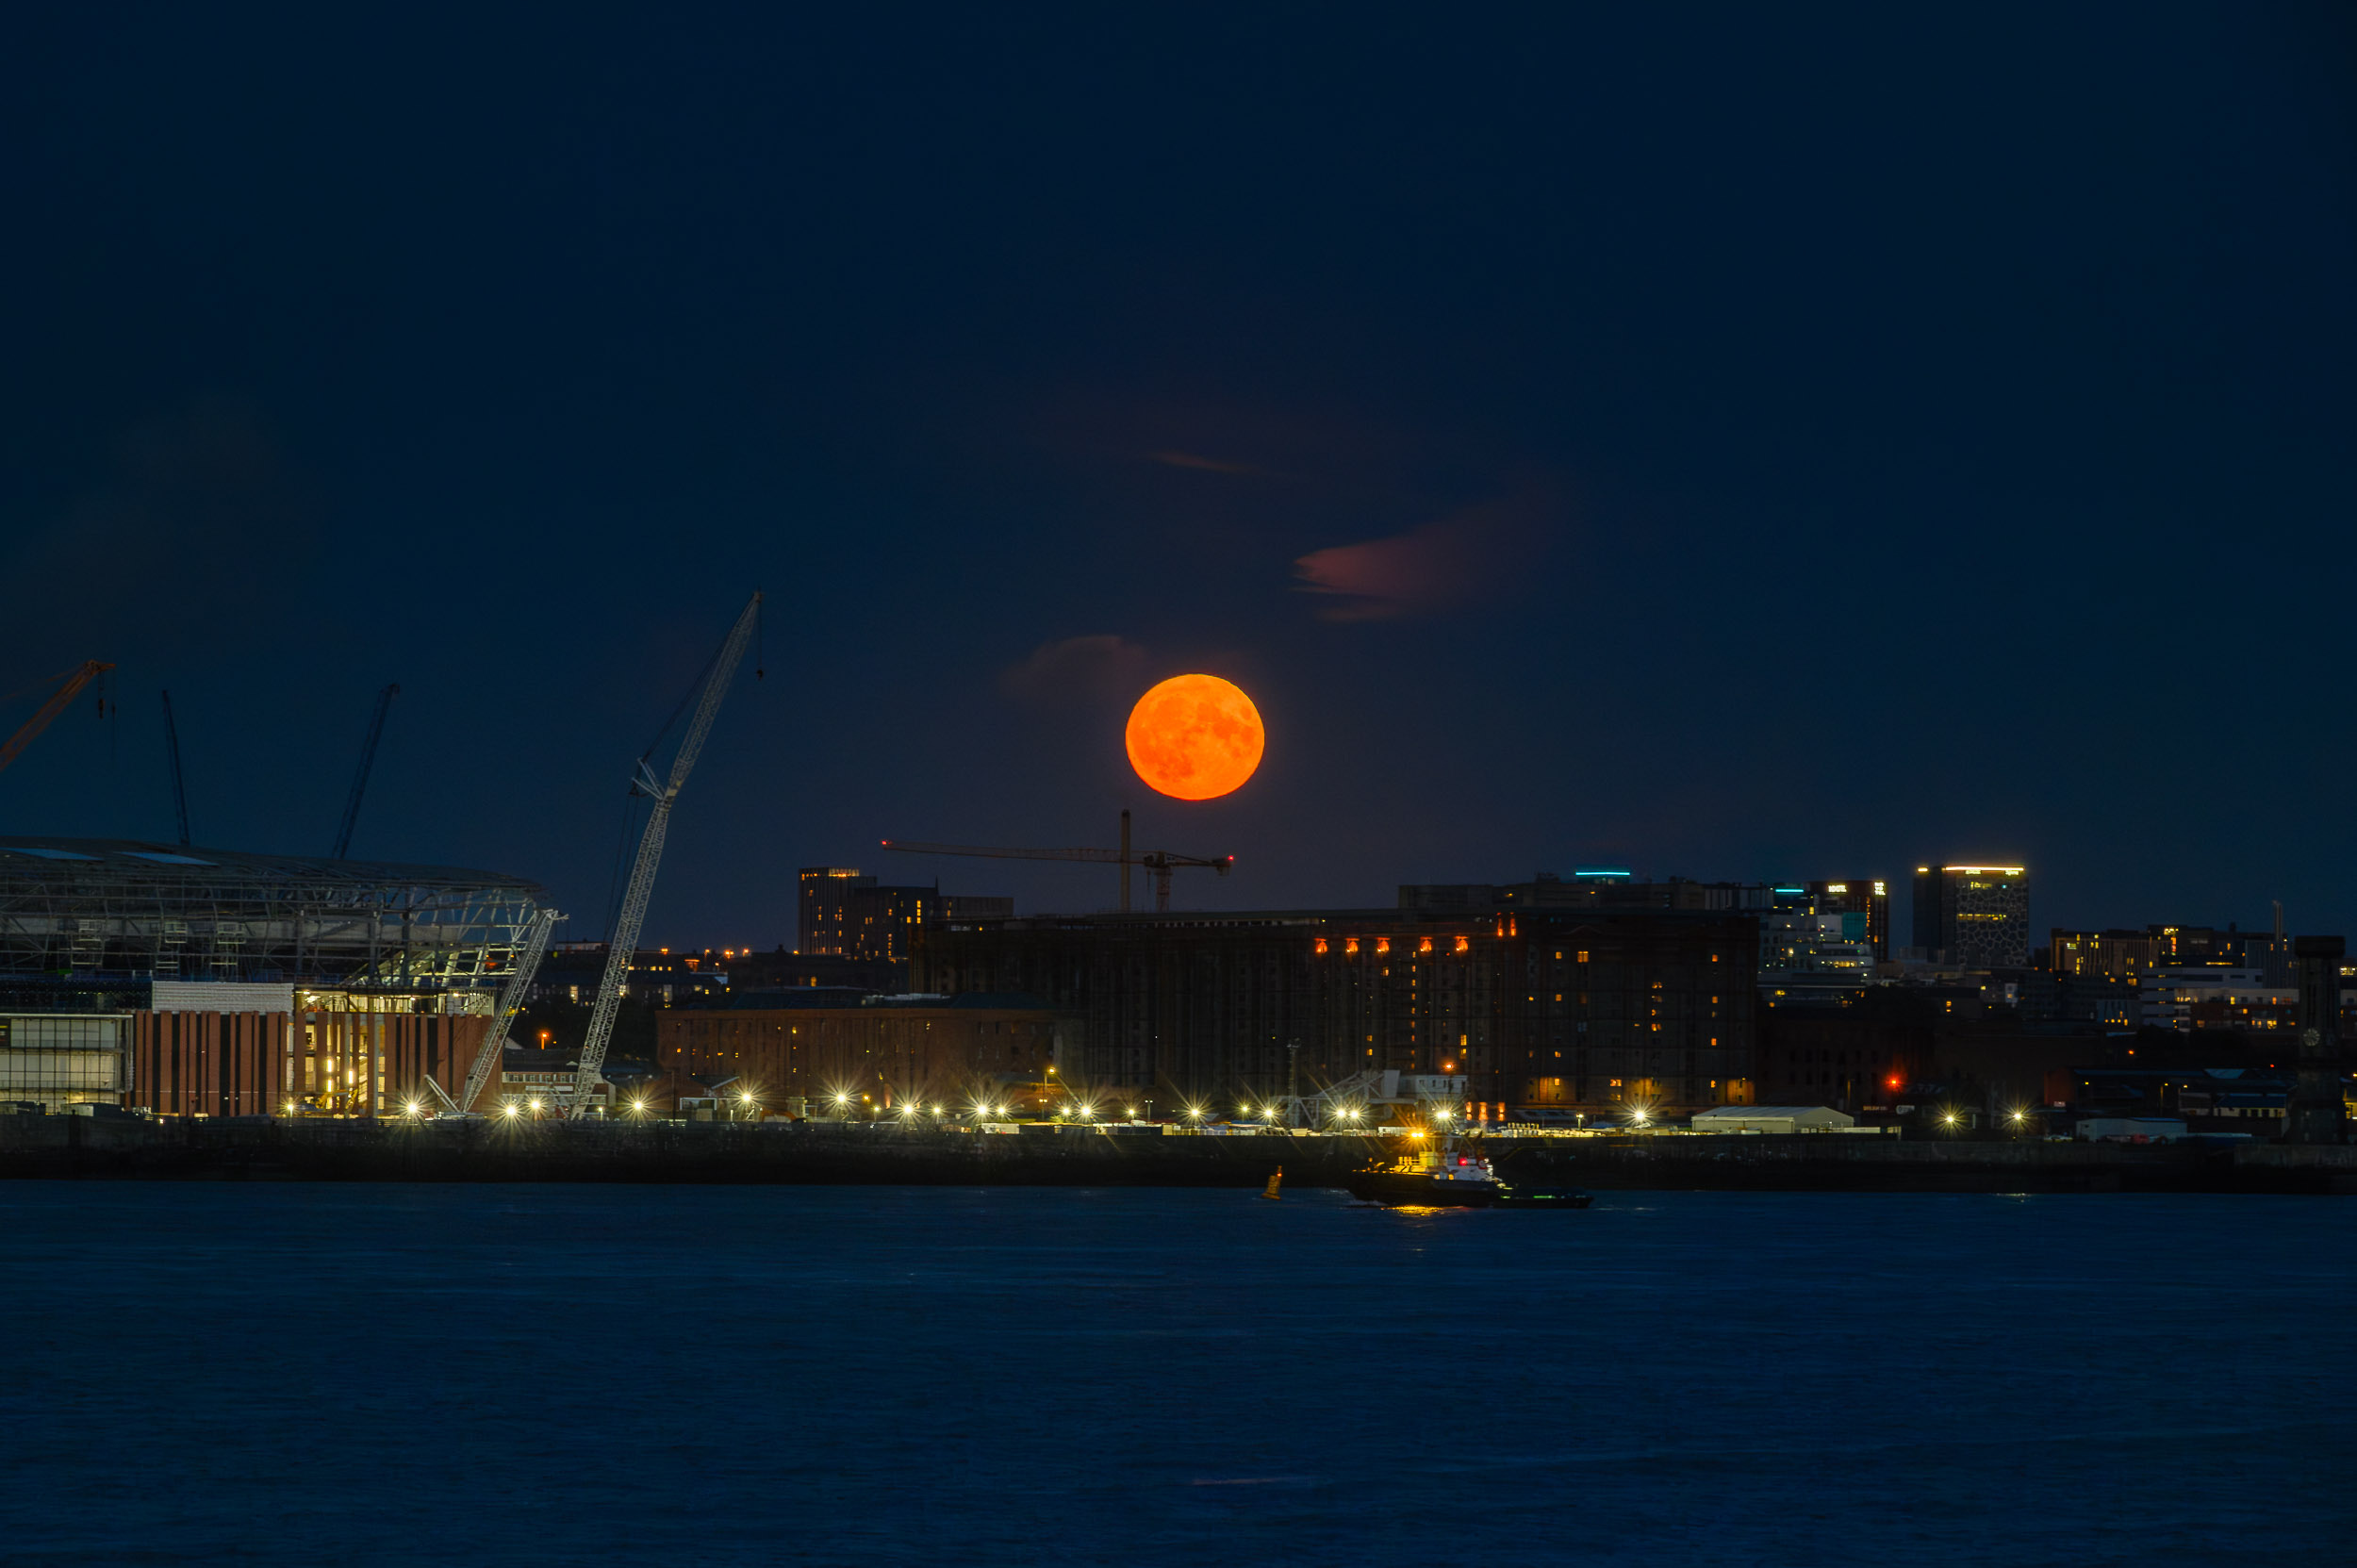 Super blue moon rises through the clouds over the Liverpool waterfront. A tug sails down river.